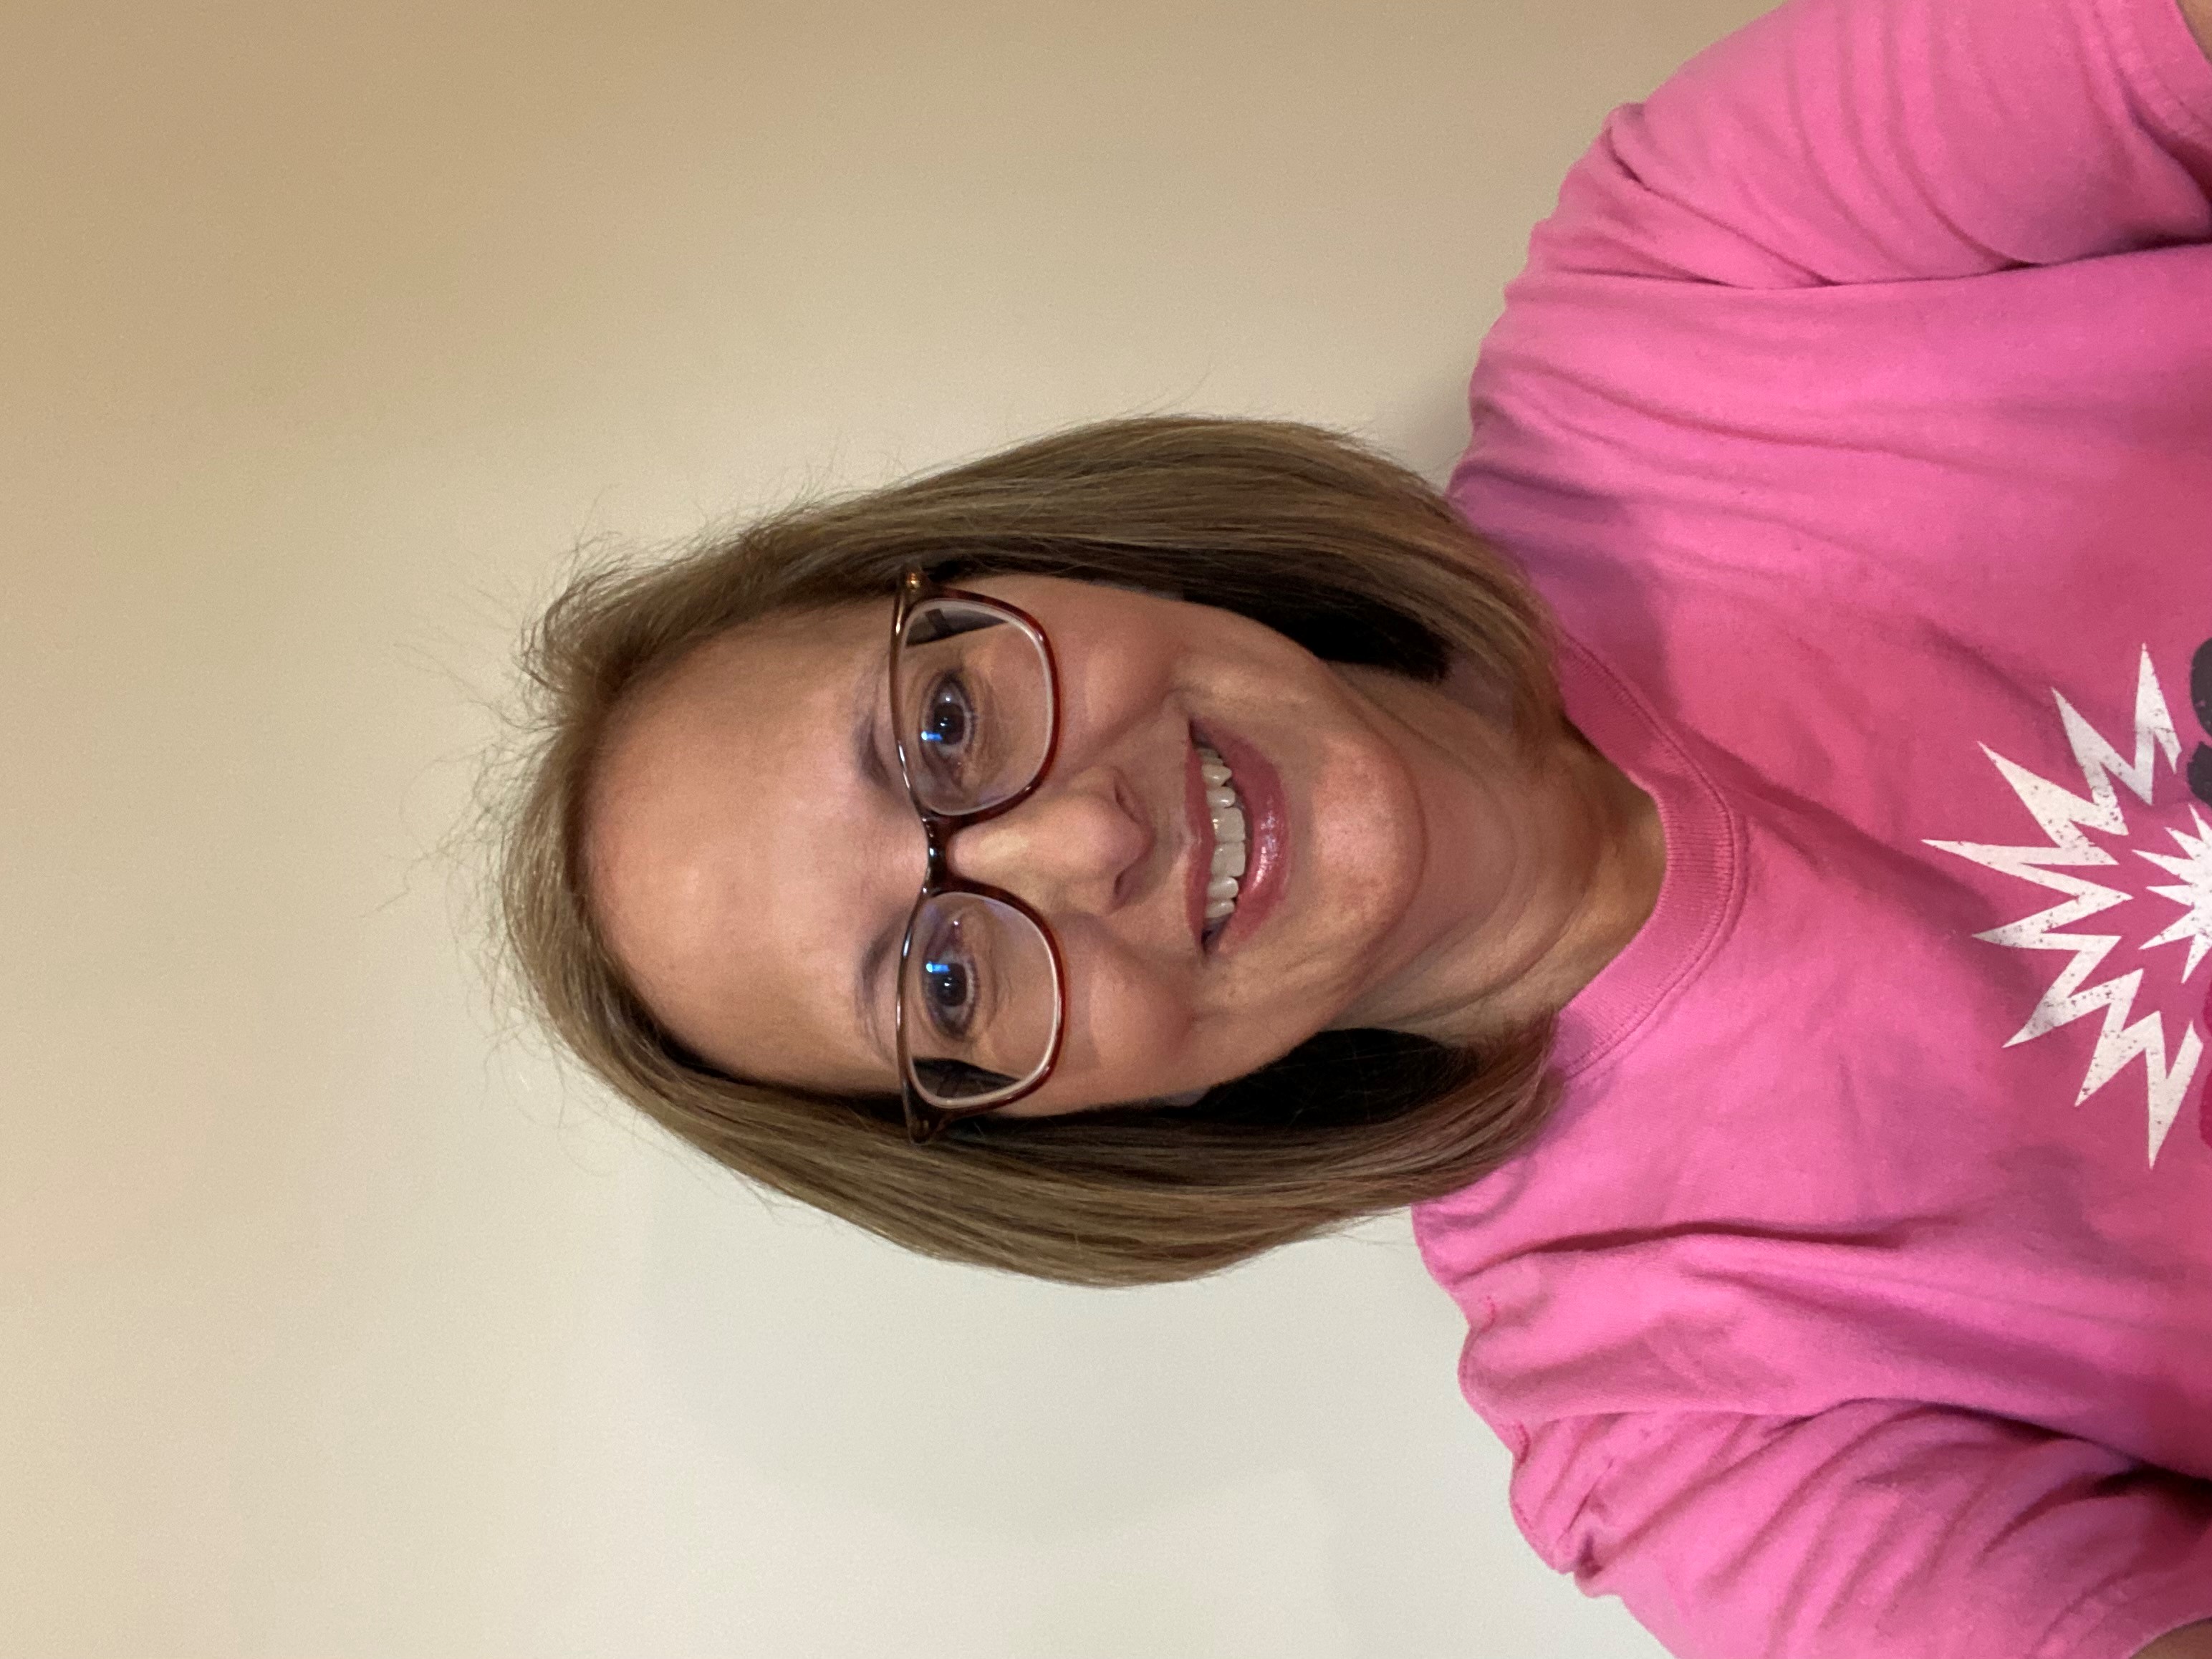 "As a breast cancer survivor, I understand the tremendous importance of early detection. Lives are saved, including my own, when cancer is detected and treated as early as possible. I would also like to thank my EMS family for all of the support they gave me and my family."- Carol Bowman, EMS Infra & Sec Eng Mgr,  Alabama Power